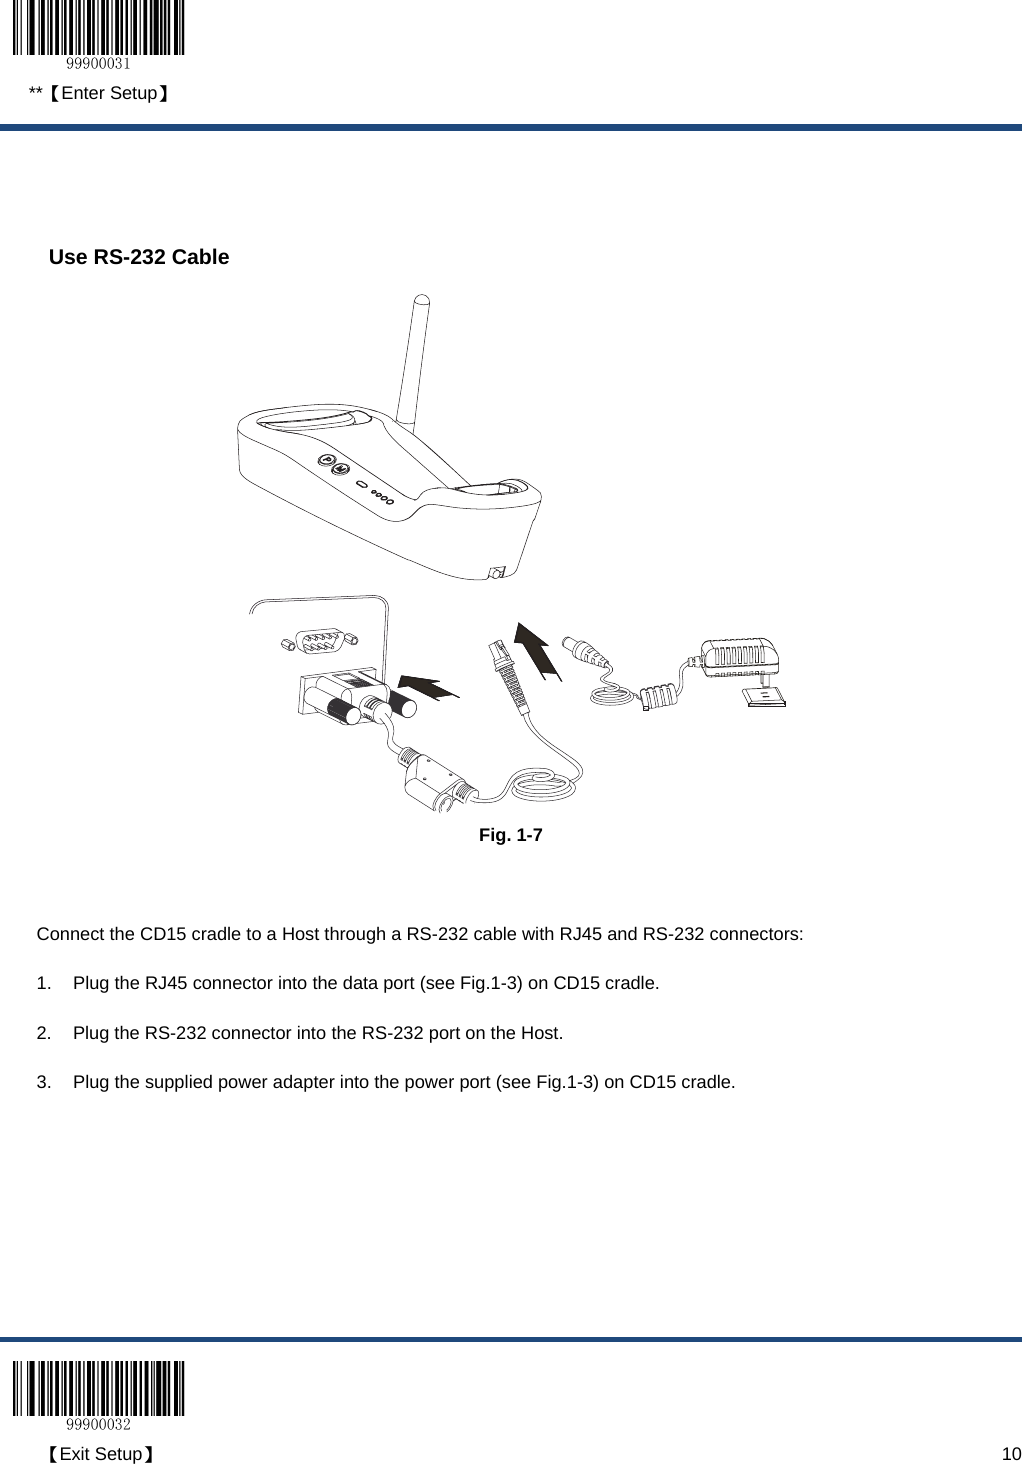  **【Enter Setup】  【Exit Setup】                                                                                                                                                                      10   Use RS-232 Cable  Fig. 1-7  Connect the CD15 cradle to a Host through a RS-232 cable with RJ45 and RS-232 connectors: 1.  Plug the RJ45 connector into the data port (see Fig.1-3) on CD15 cradle. 2.  Plug the RS-232 connector into the RS-232 port on the Host. 3.  Plug the supplied power adapter into the power port (see Fig.1-3) on CD15 cradle. 